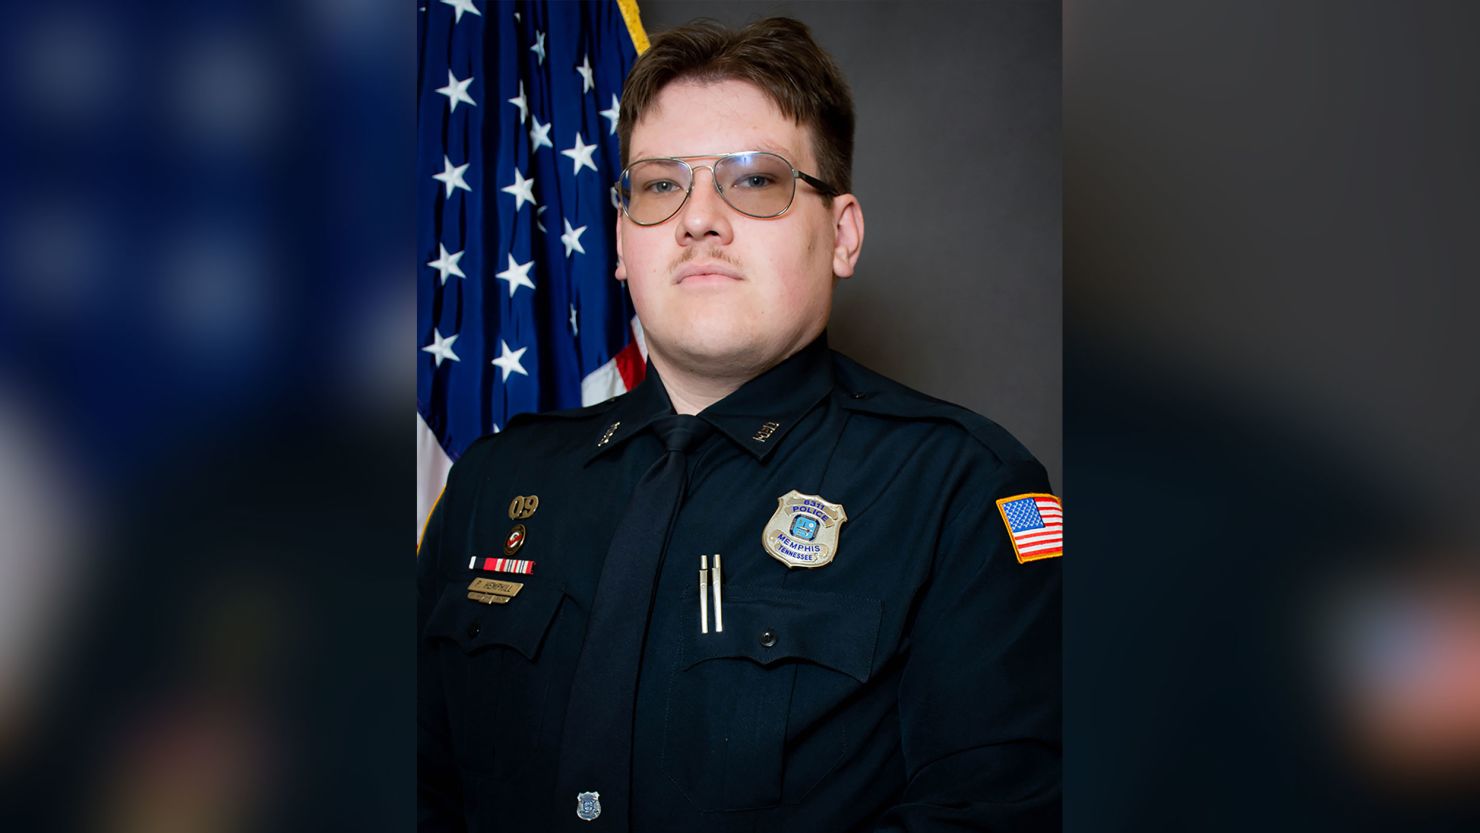 The Memphis Police Department fired Preston Hemphill after a review determined he violated multiple department policies.